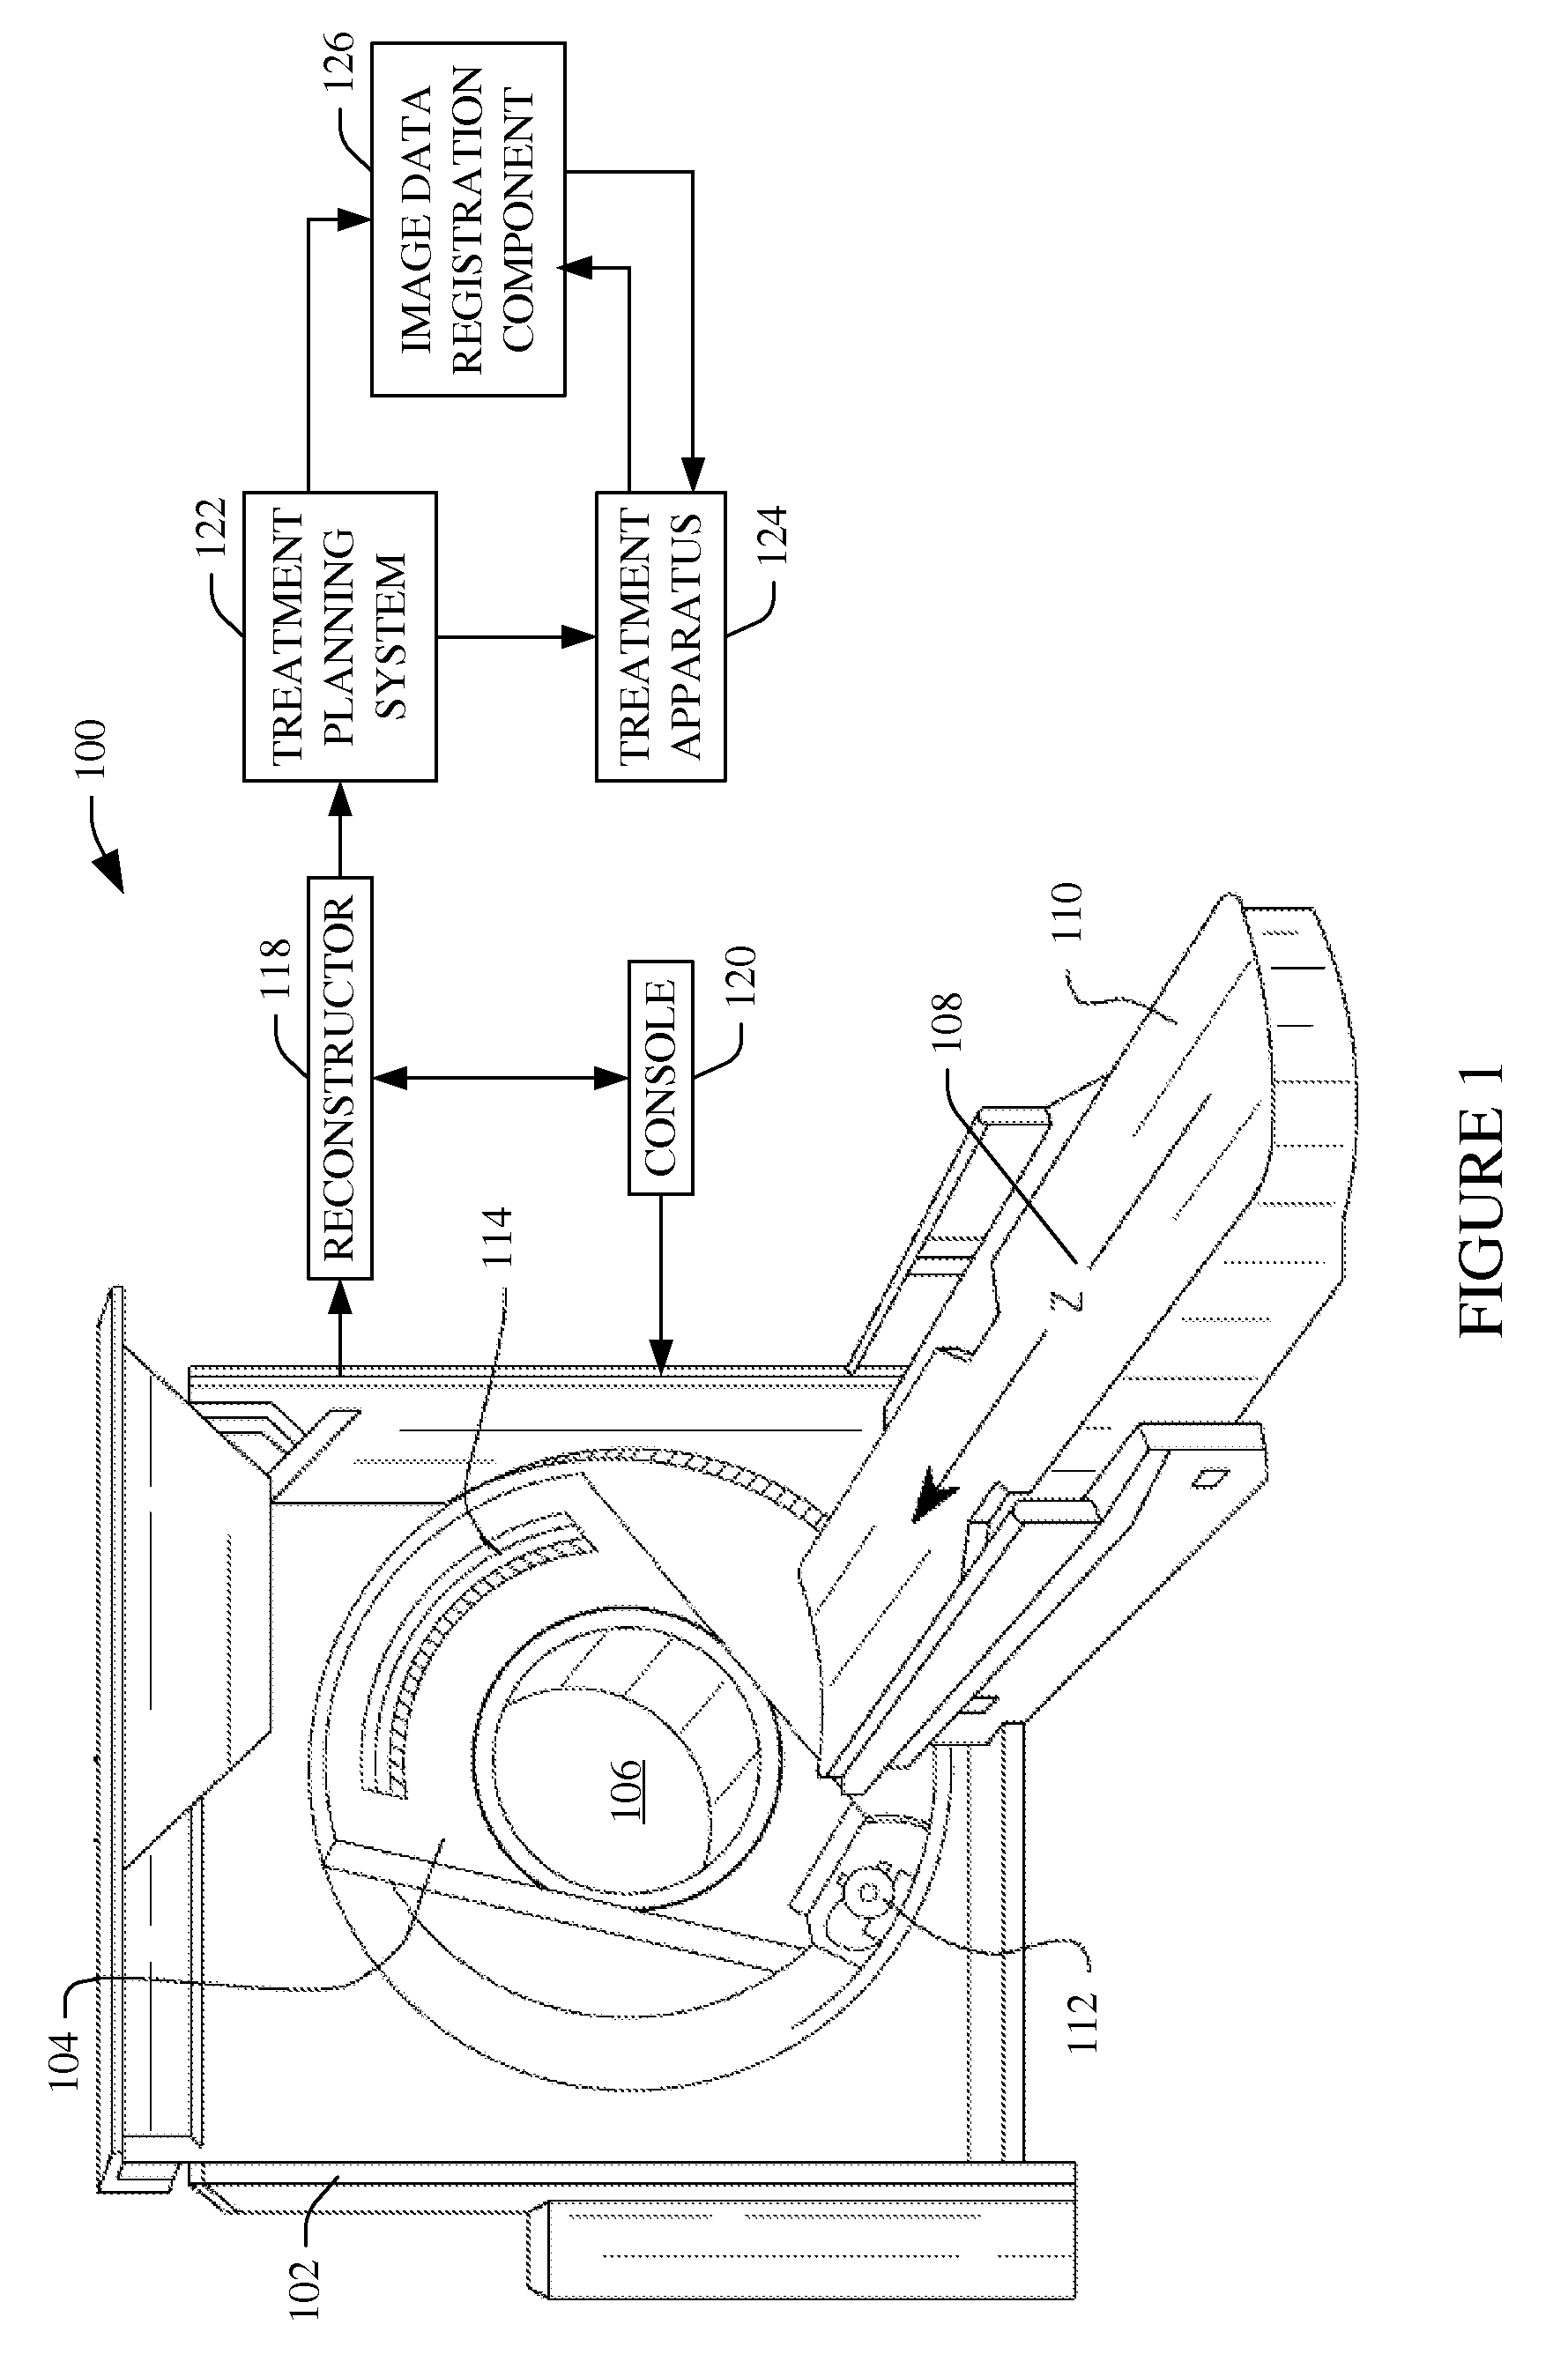 Contour guided deformable image registration